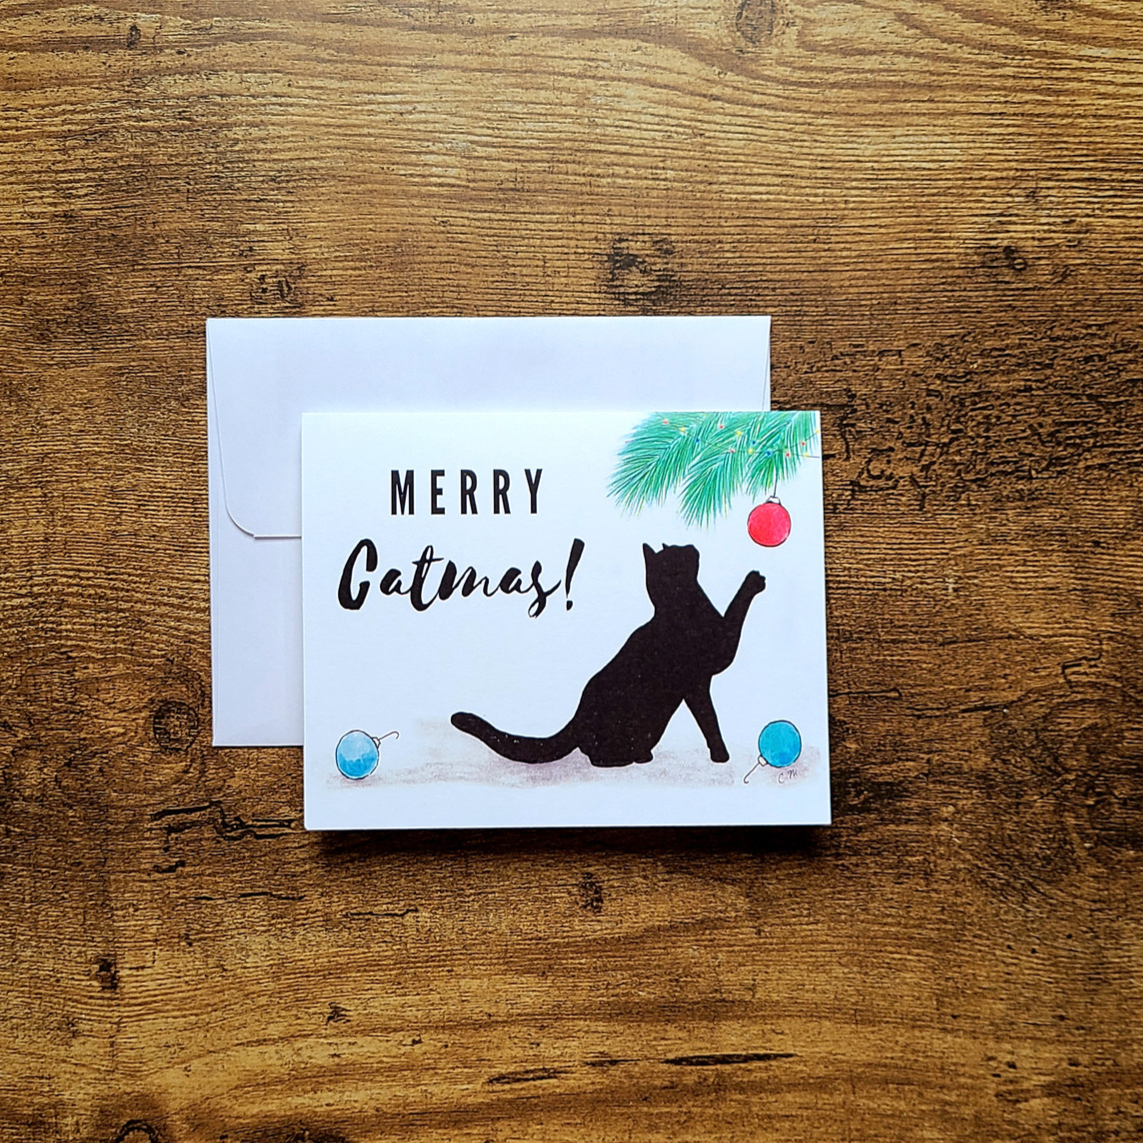 Merry catmas, Black cat Christmas card, Cute cat Holiday card, Cat lover Christmas greeting card, Meowy Christmas, Happy holidays, Cat pun